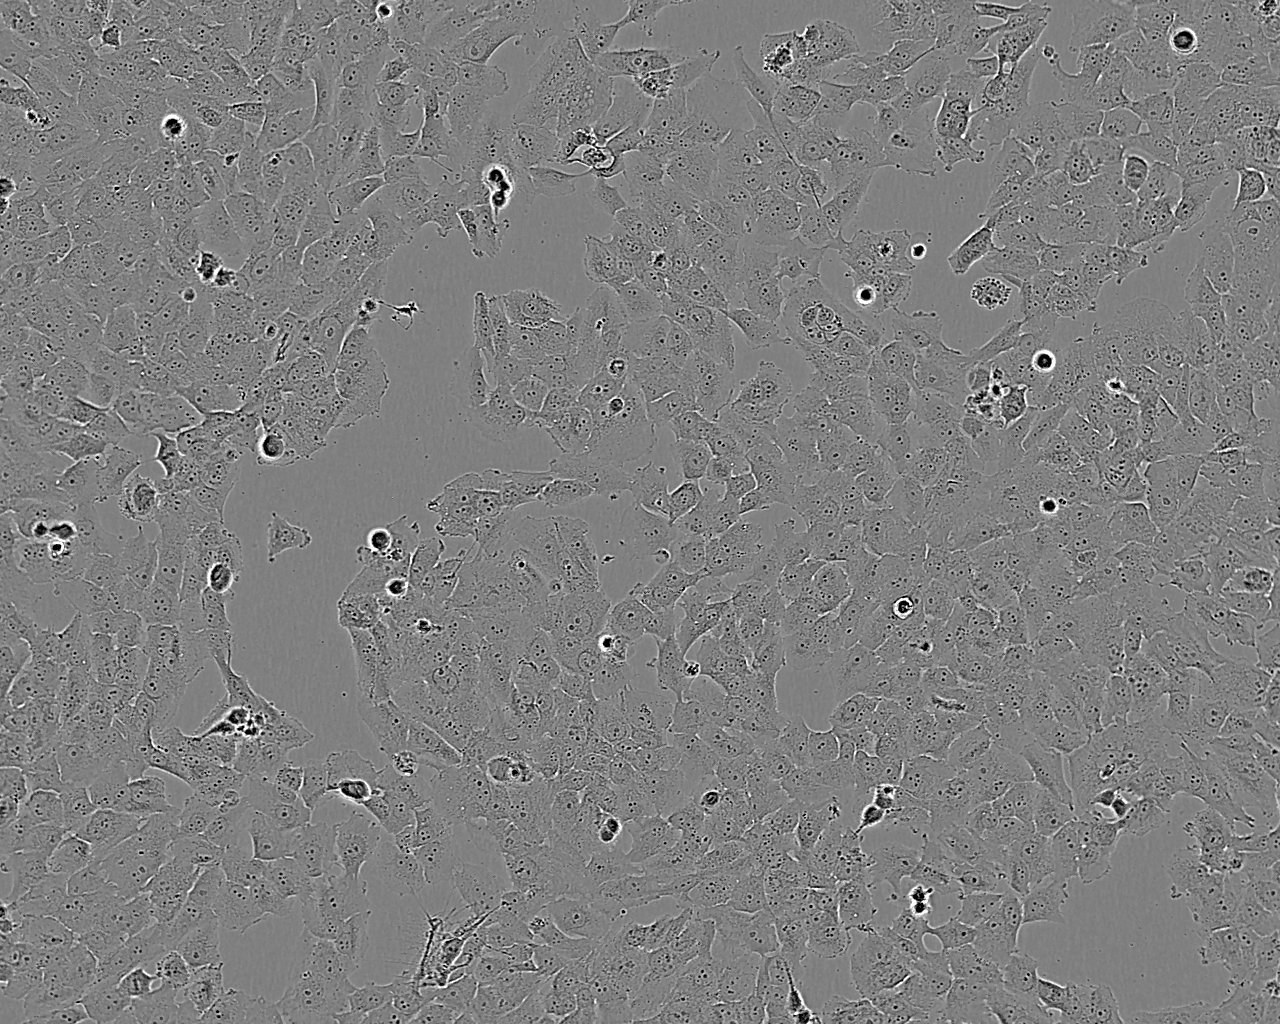 BEL-7402 epithelioid cells人肝癌细胞系,BEL-7402 epithelioid cells